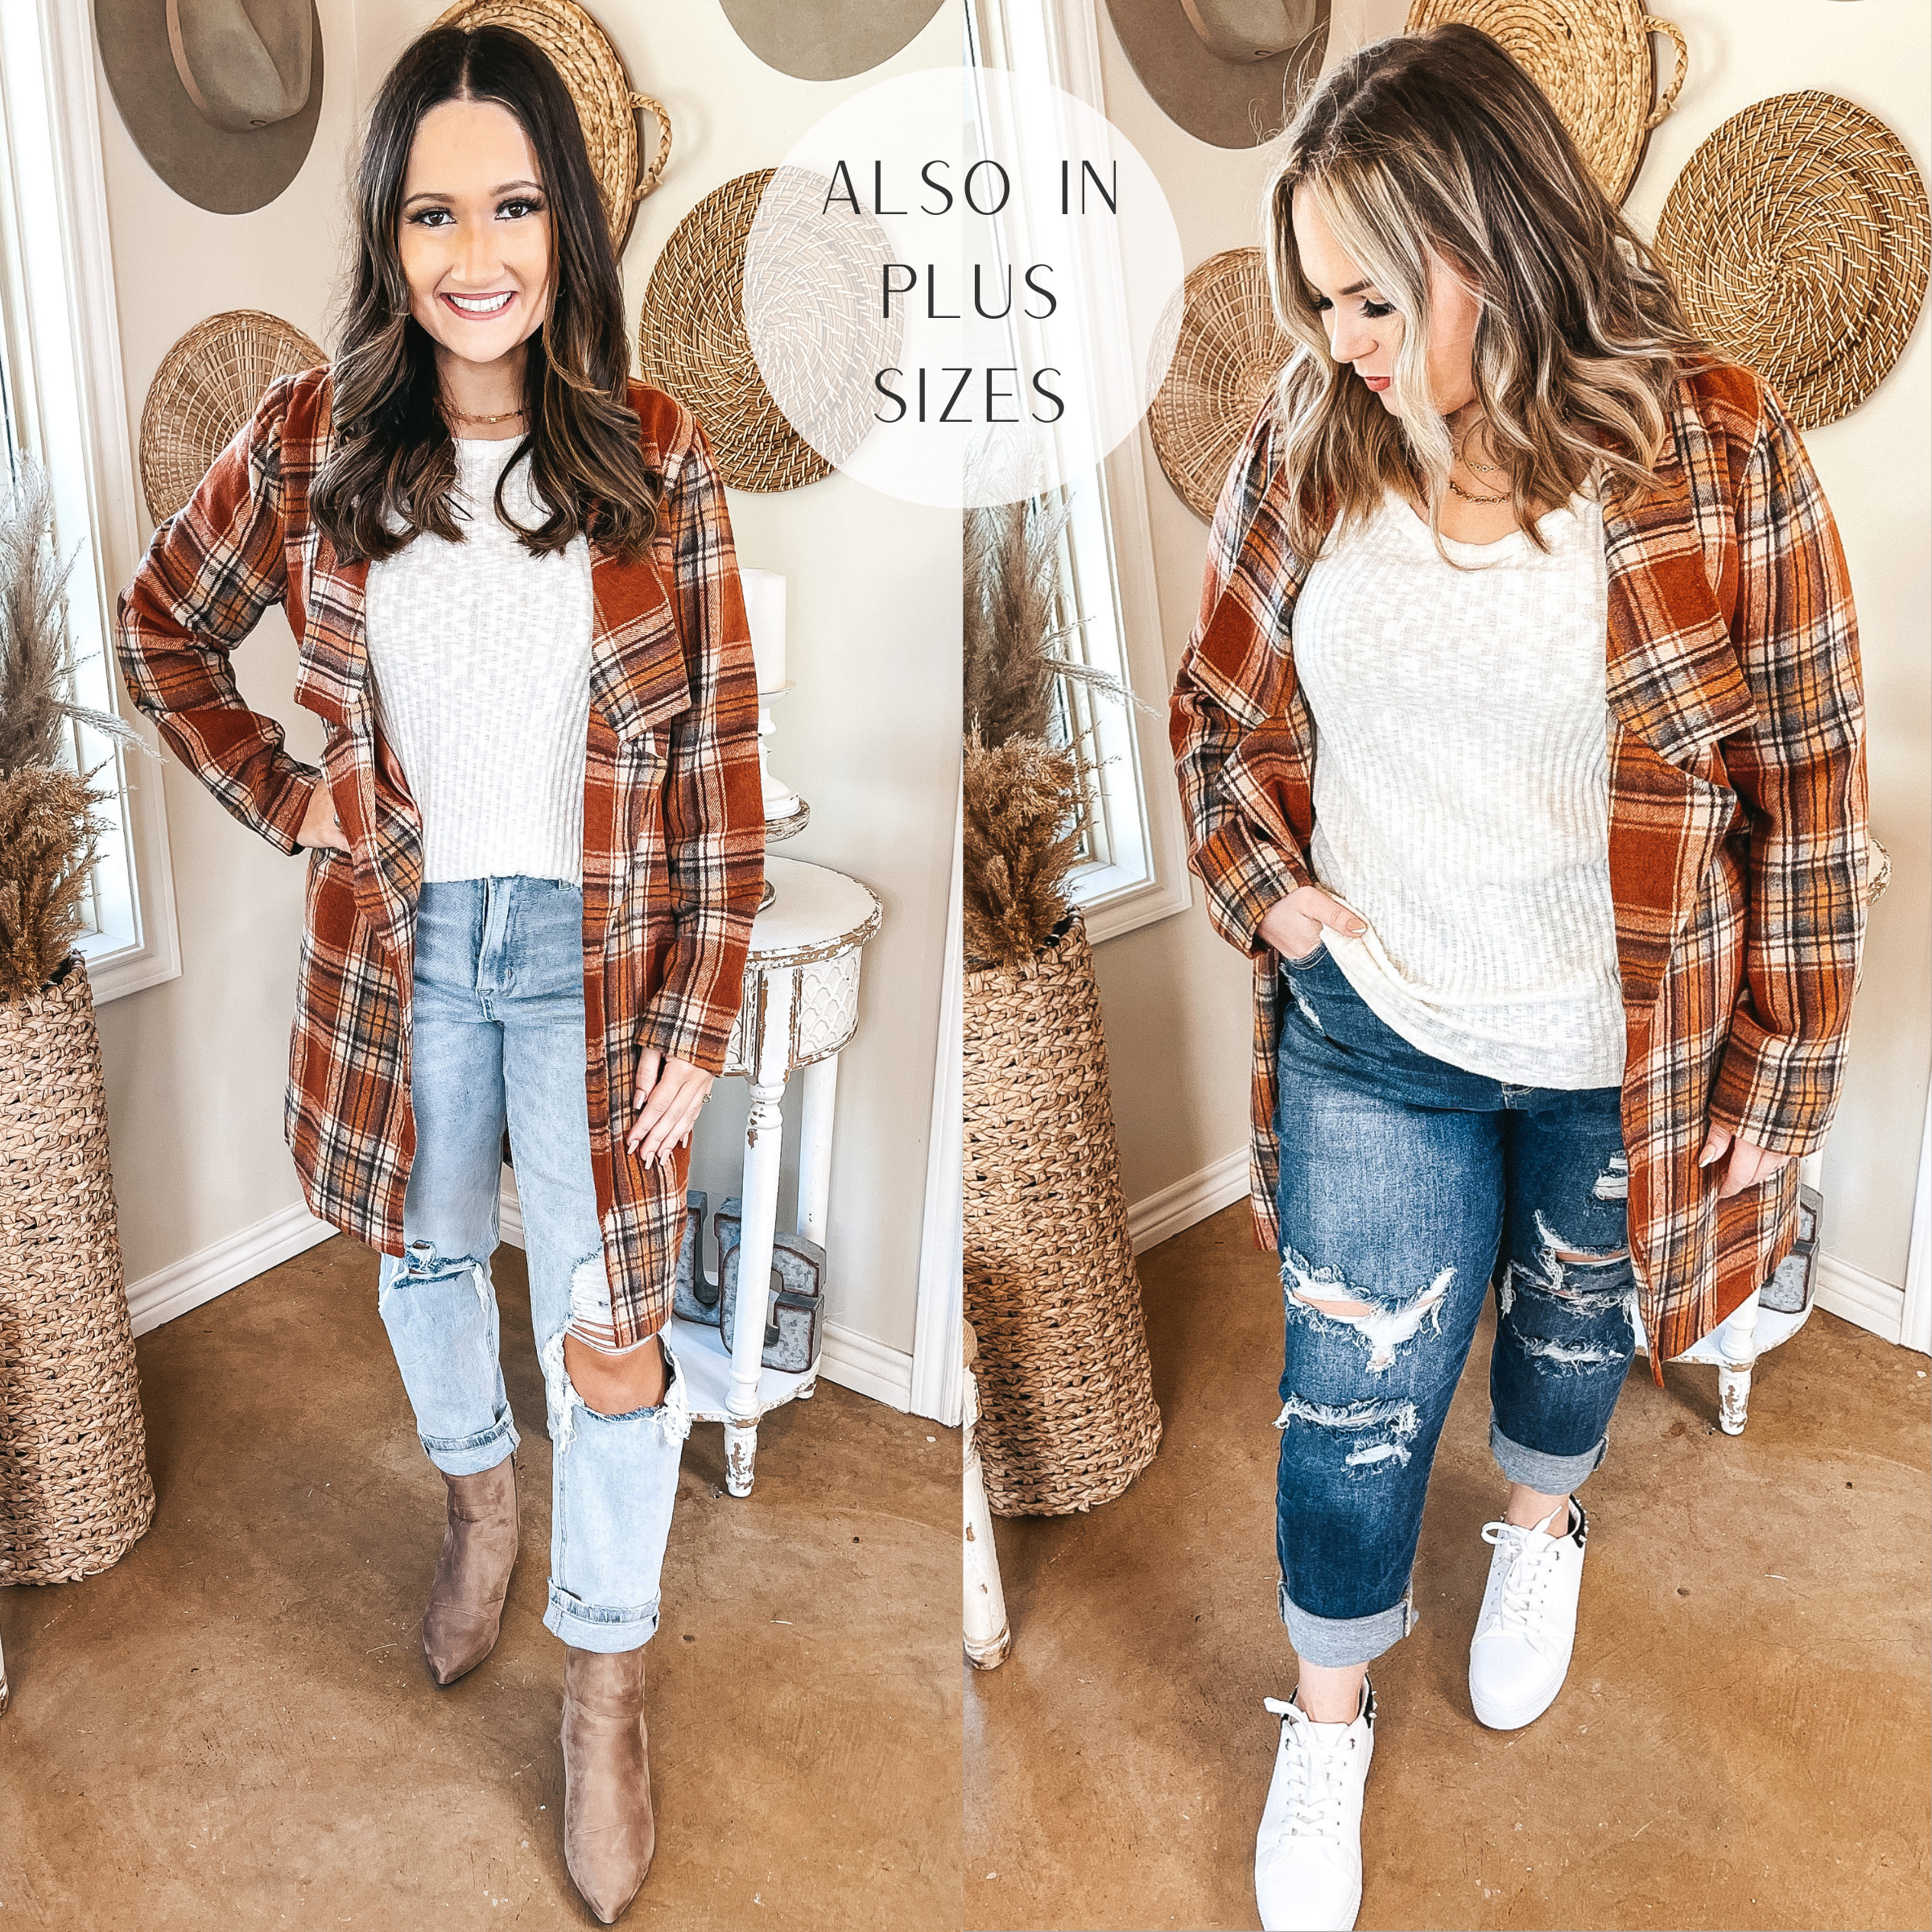 Two models wear this rusty black and orange plaid open jacket with a white sweater underneath. The model on the left wears it with light wash ripped jeans and tan ankle boots. The plus size model on the right wears it with medium wash jeans and white sneakers. 